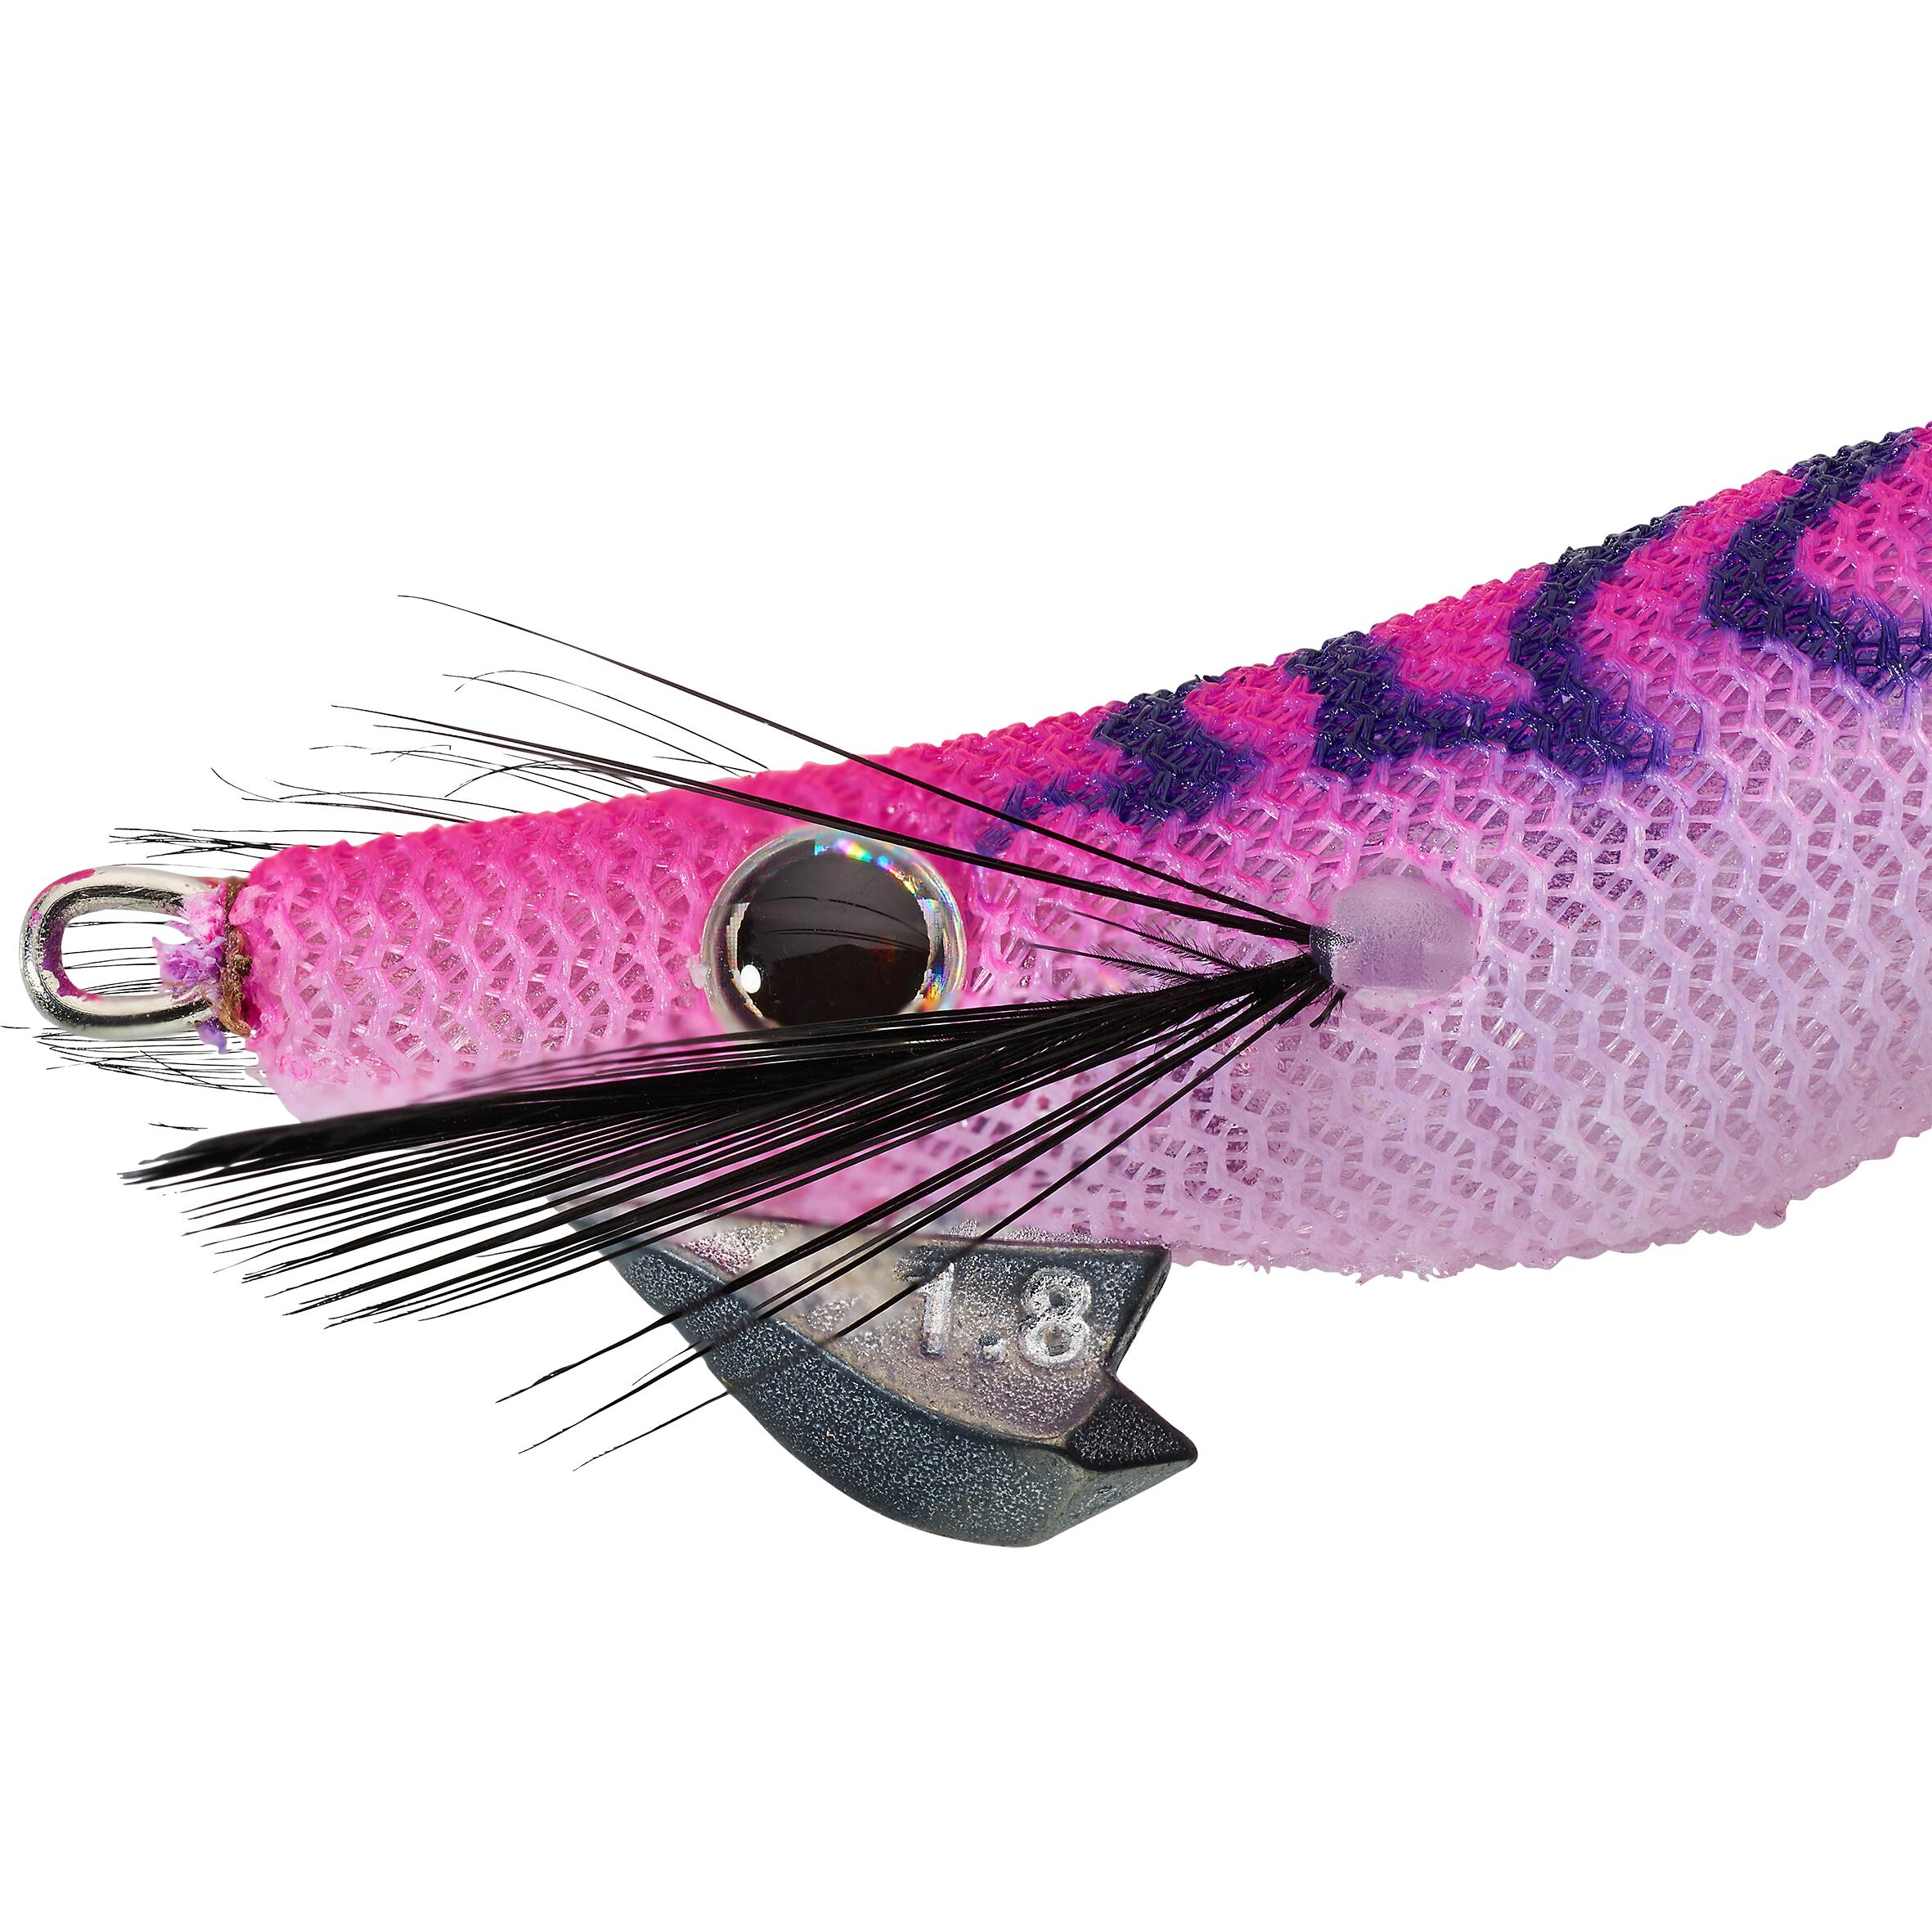 Sea fishing for cuttlefish and squid sinking jig EBI S 1.8/85 Pink 2/3